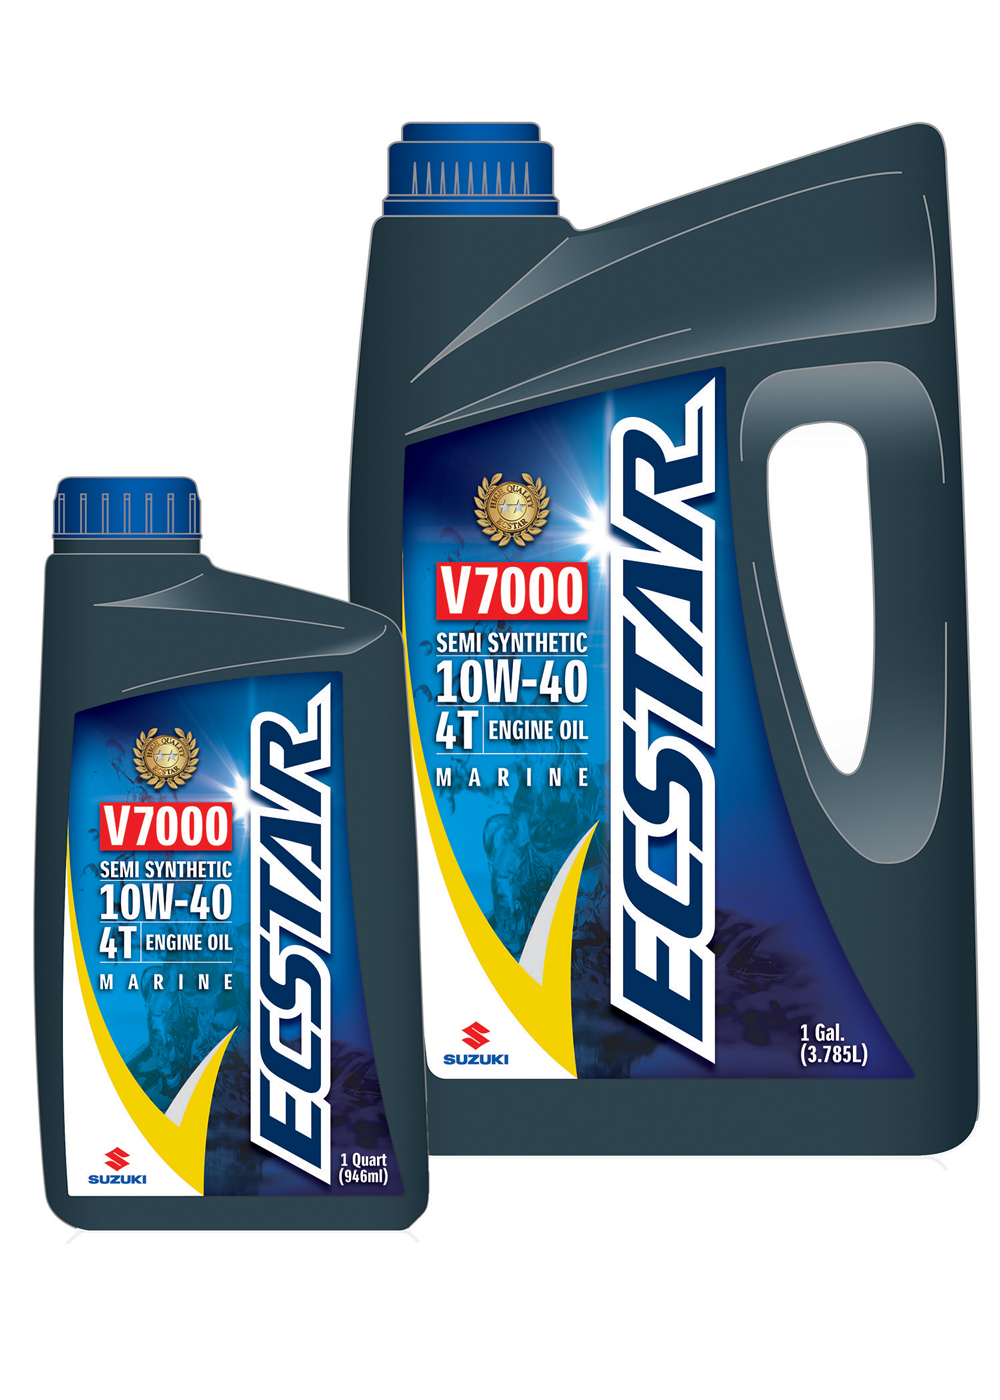 All ECSTAR Oil and Chemical products will be available exclusively through authorized Suzuki dealers.